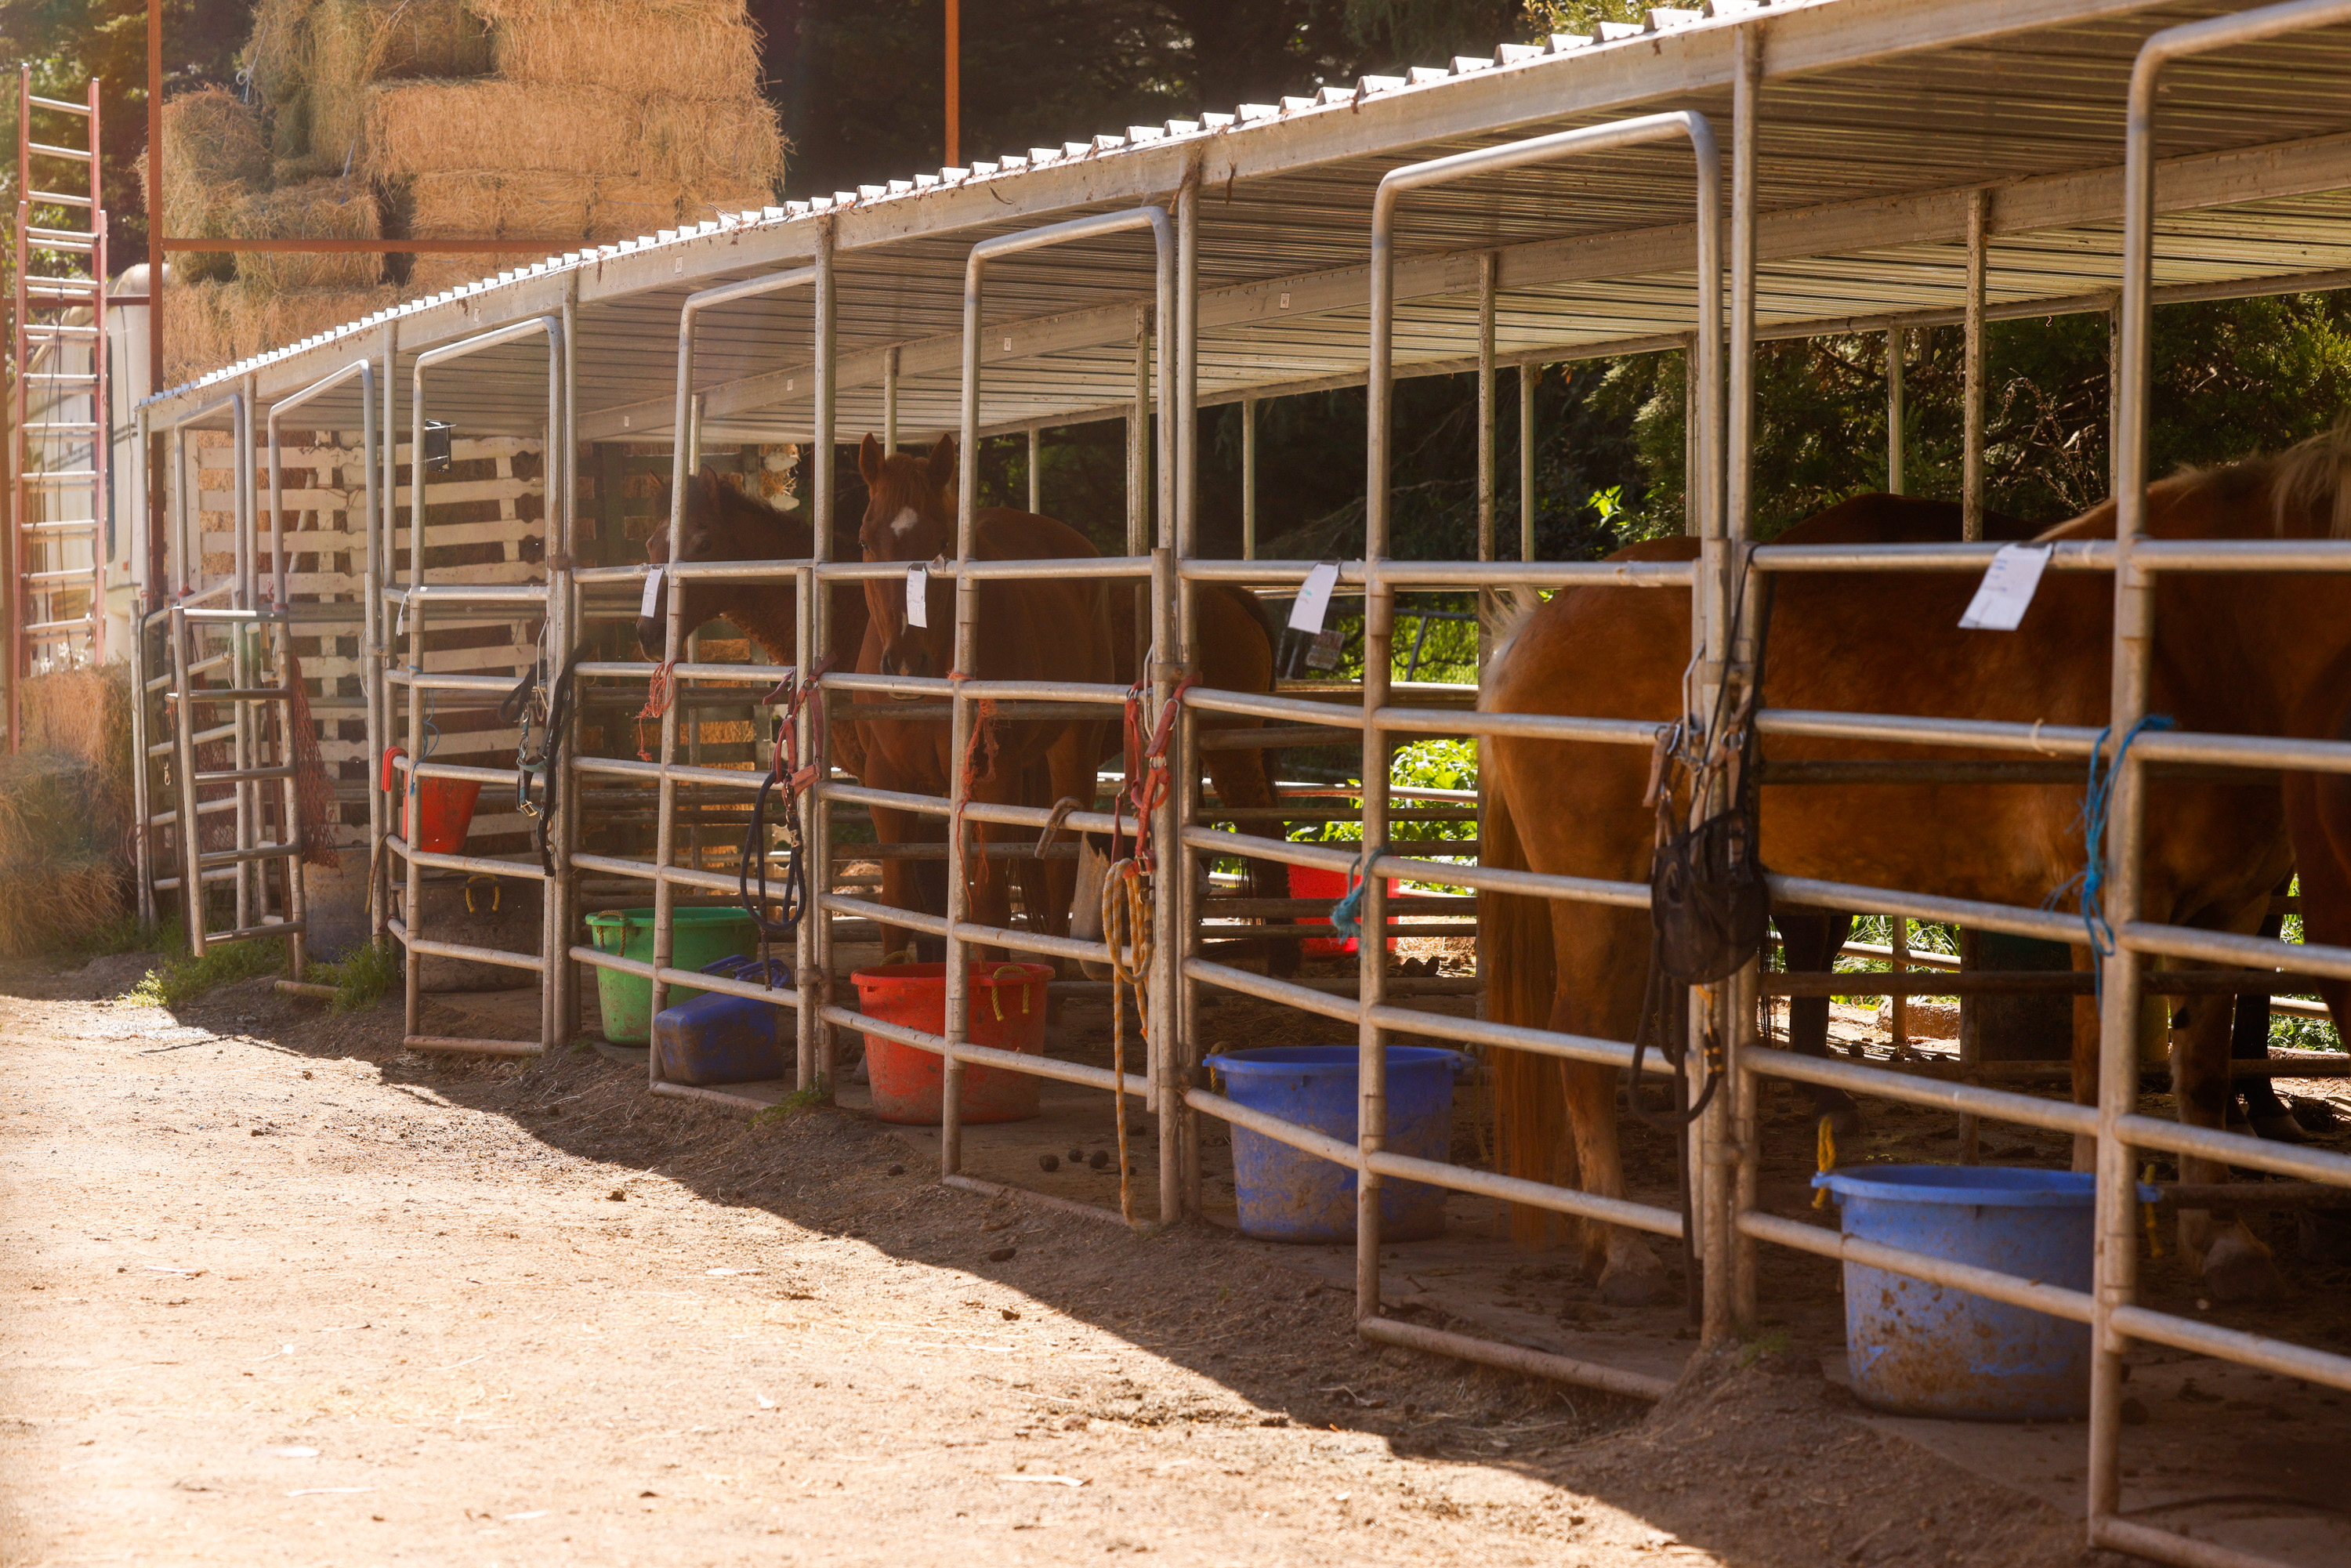 Horses stand in a sunny, open-air stable with metal bars, beside stacks of hay and variously colored feed buckets.